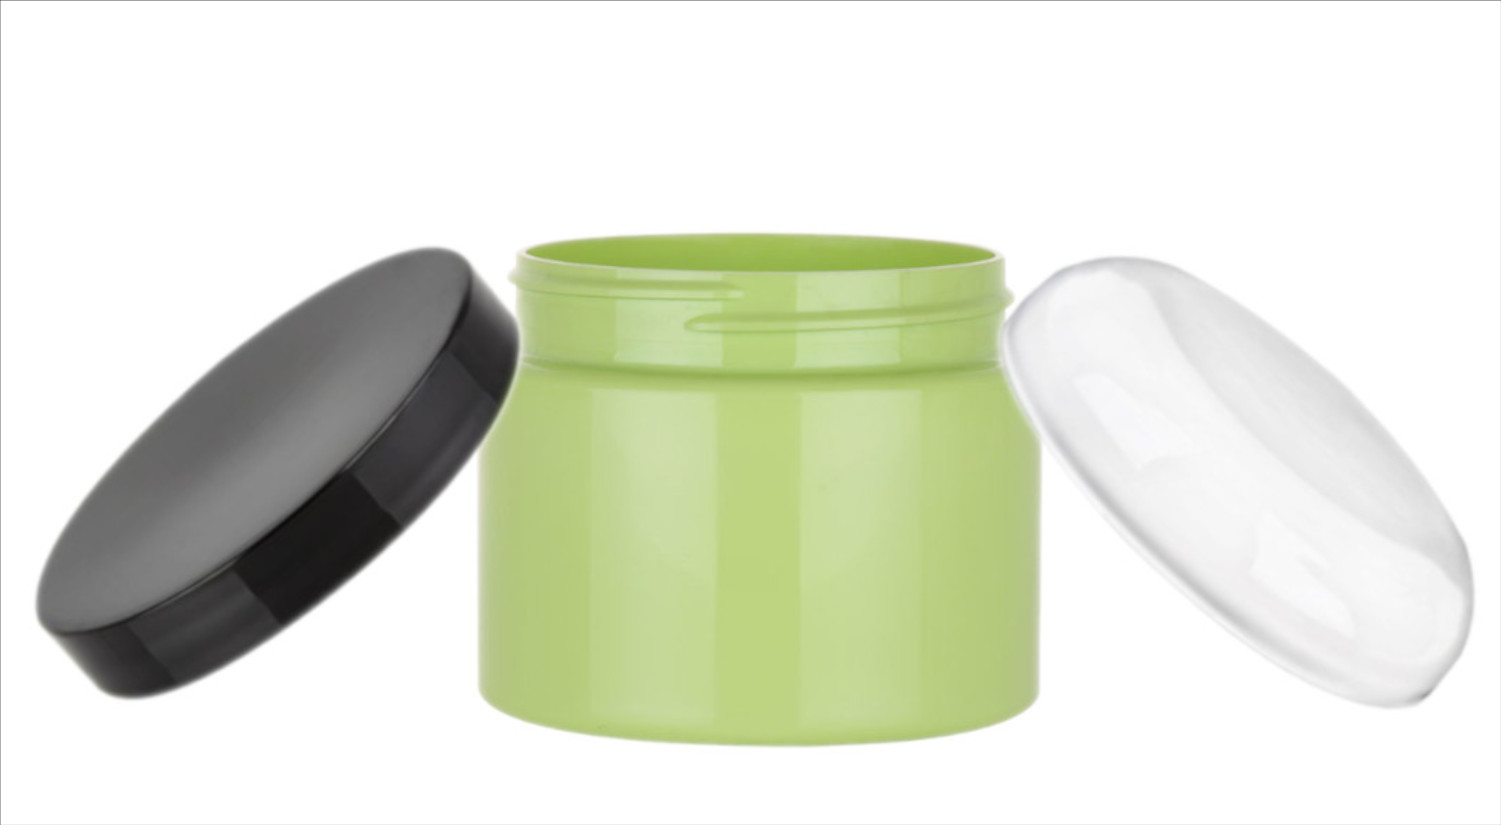 Green plastic jars offered in a 1, 2 & 8 oz size.